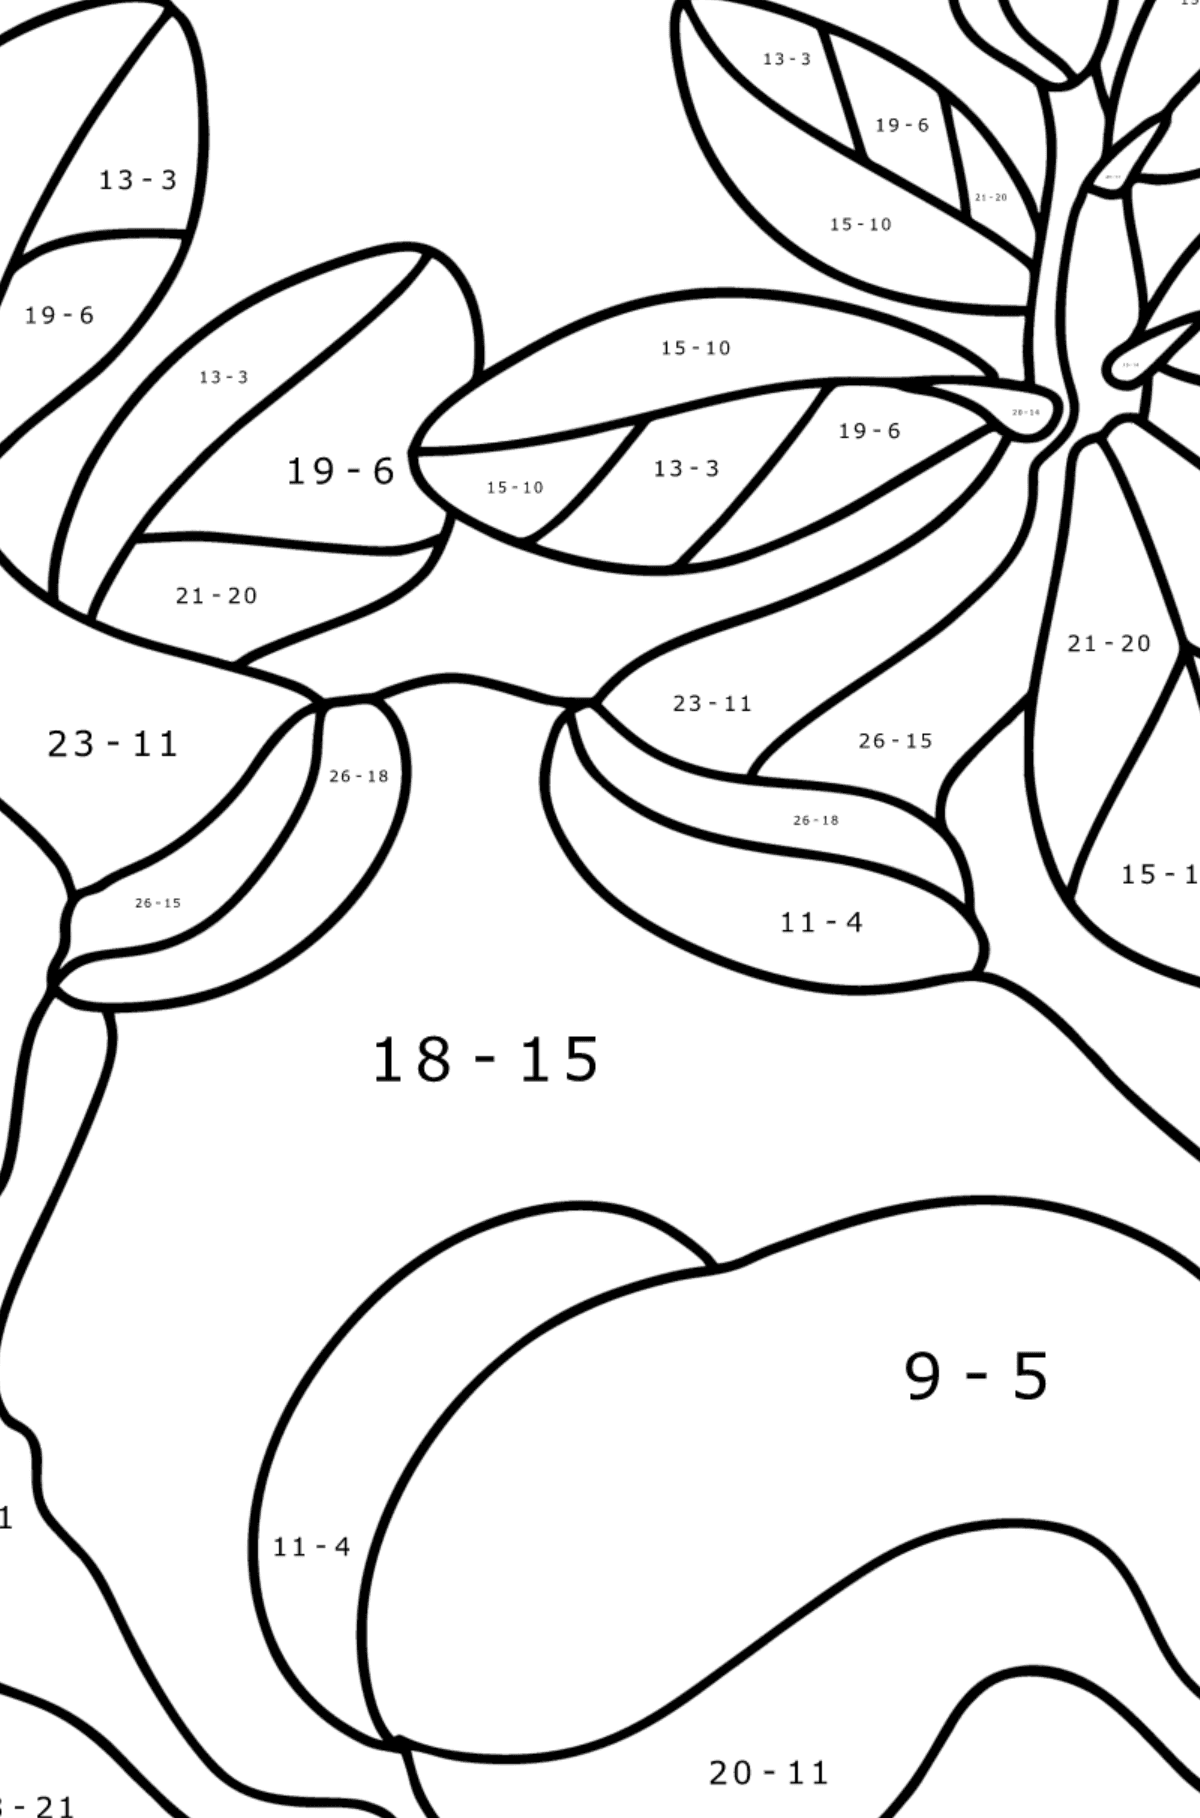 Adenium coloring page - Math Coloring - Subtraction for Kids